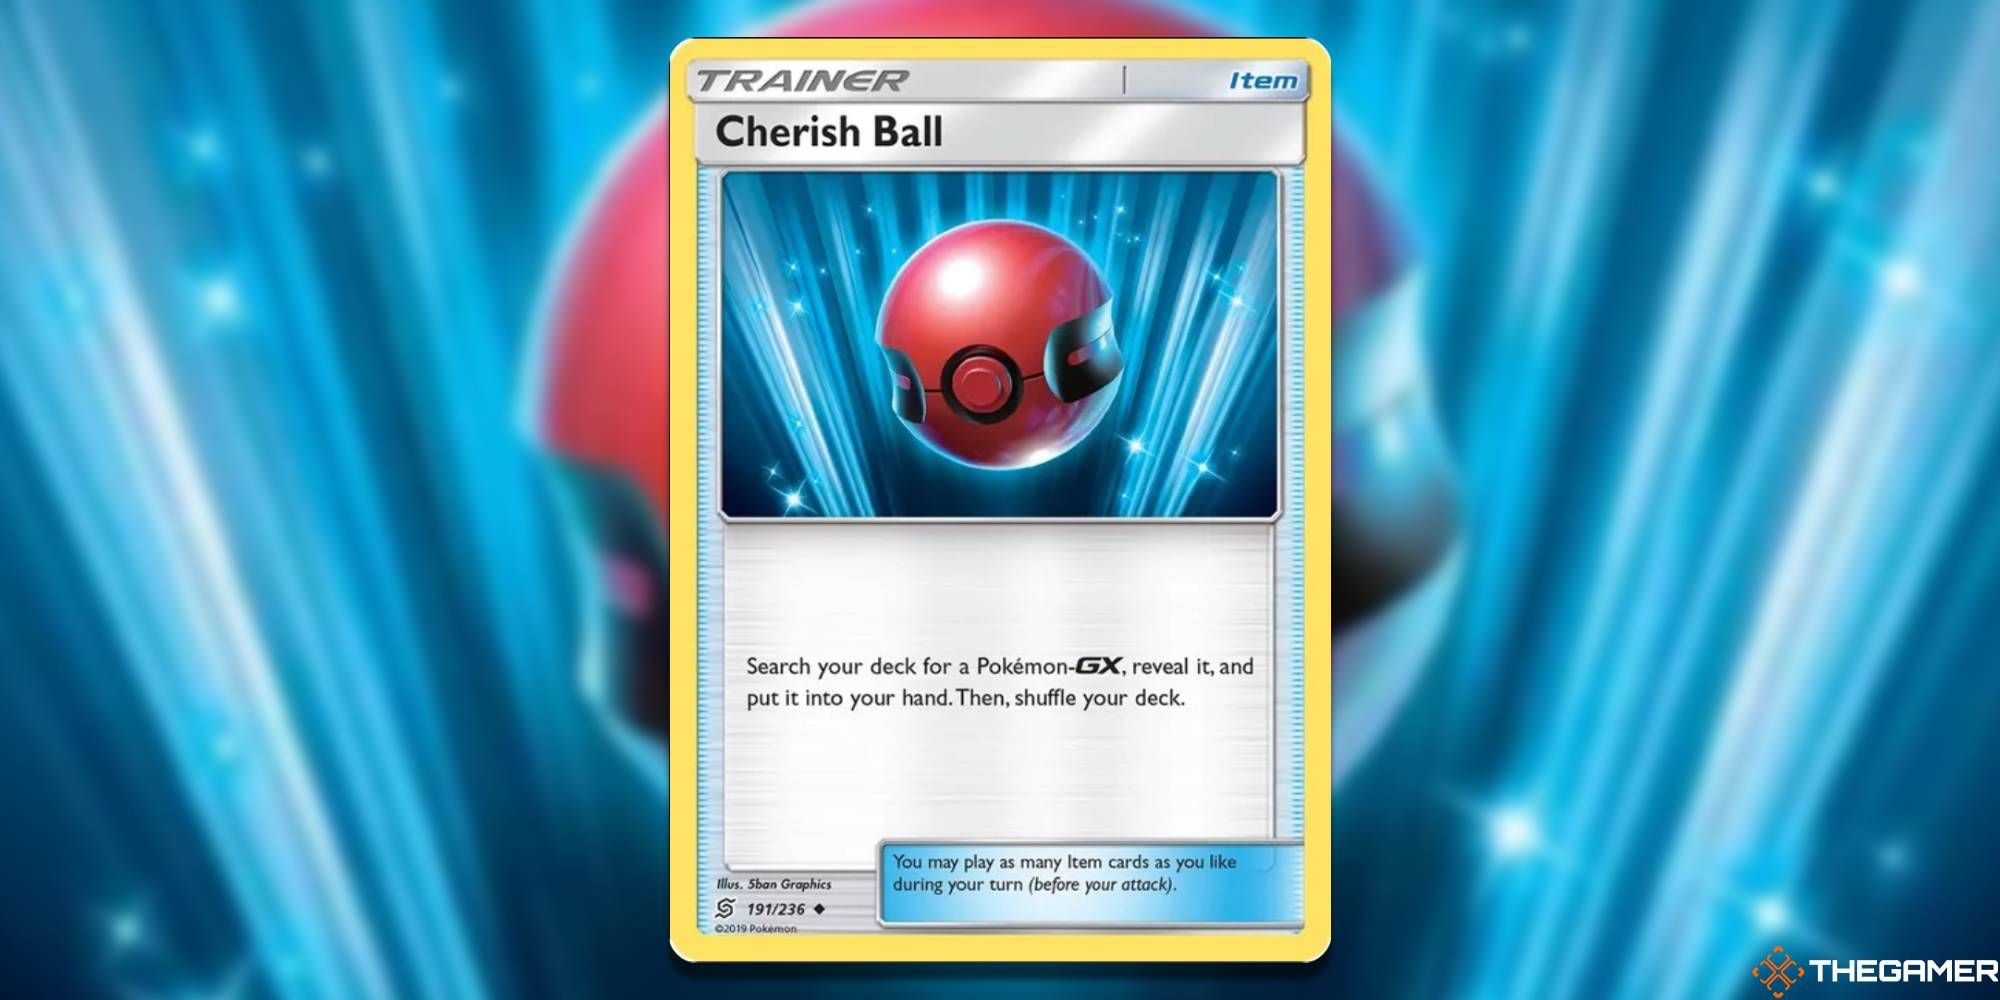 Cherish Ball from the Pokemon TCG, with blurred background